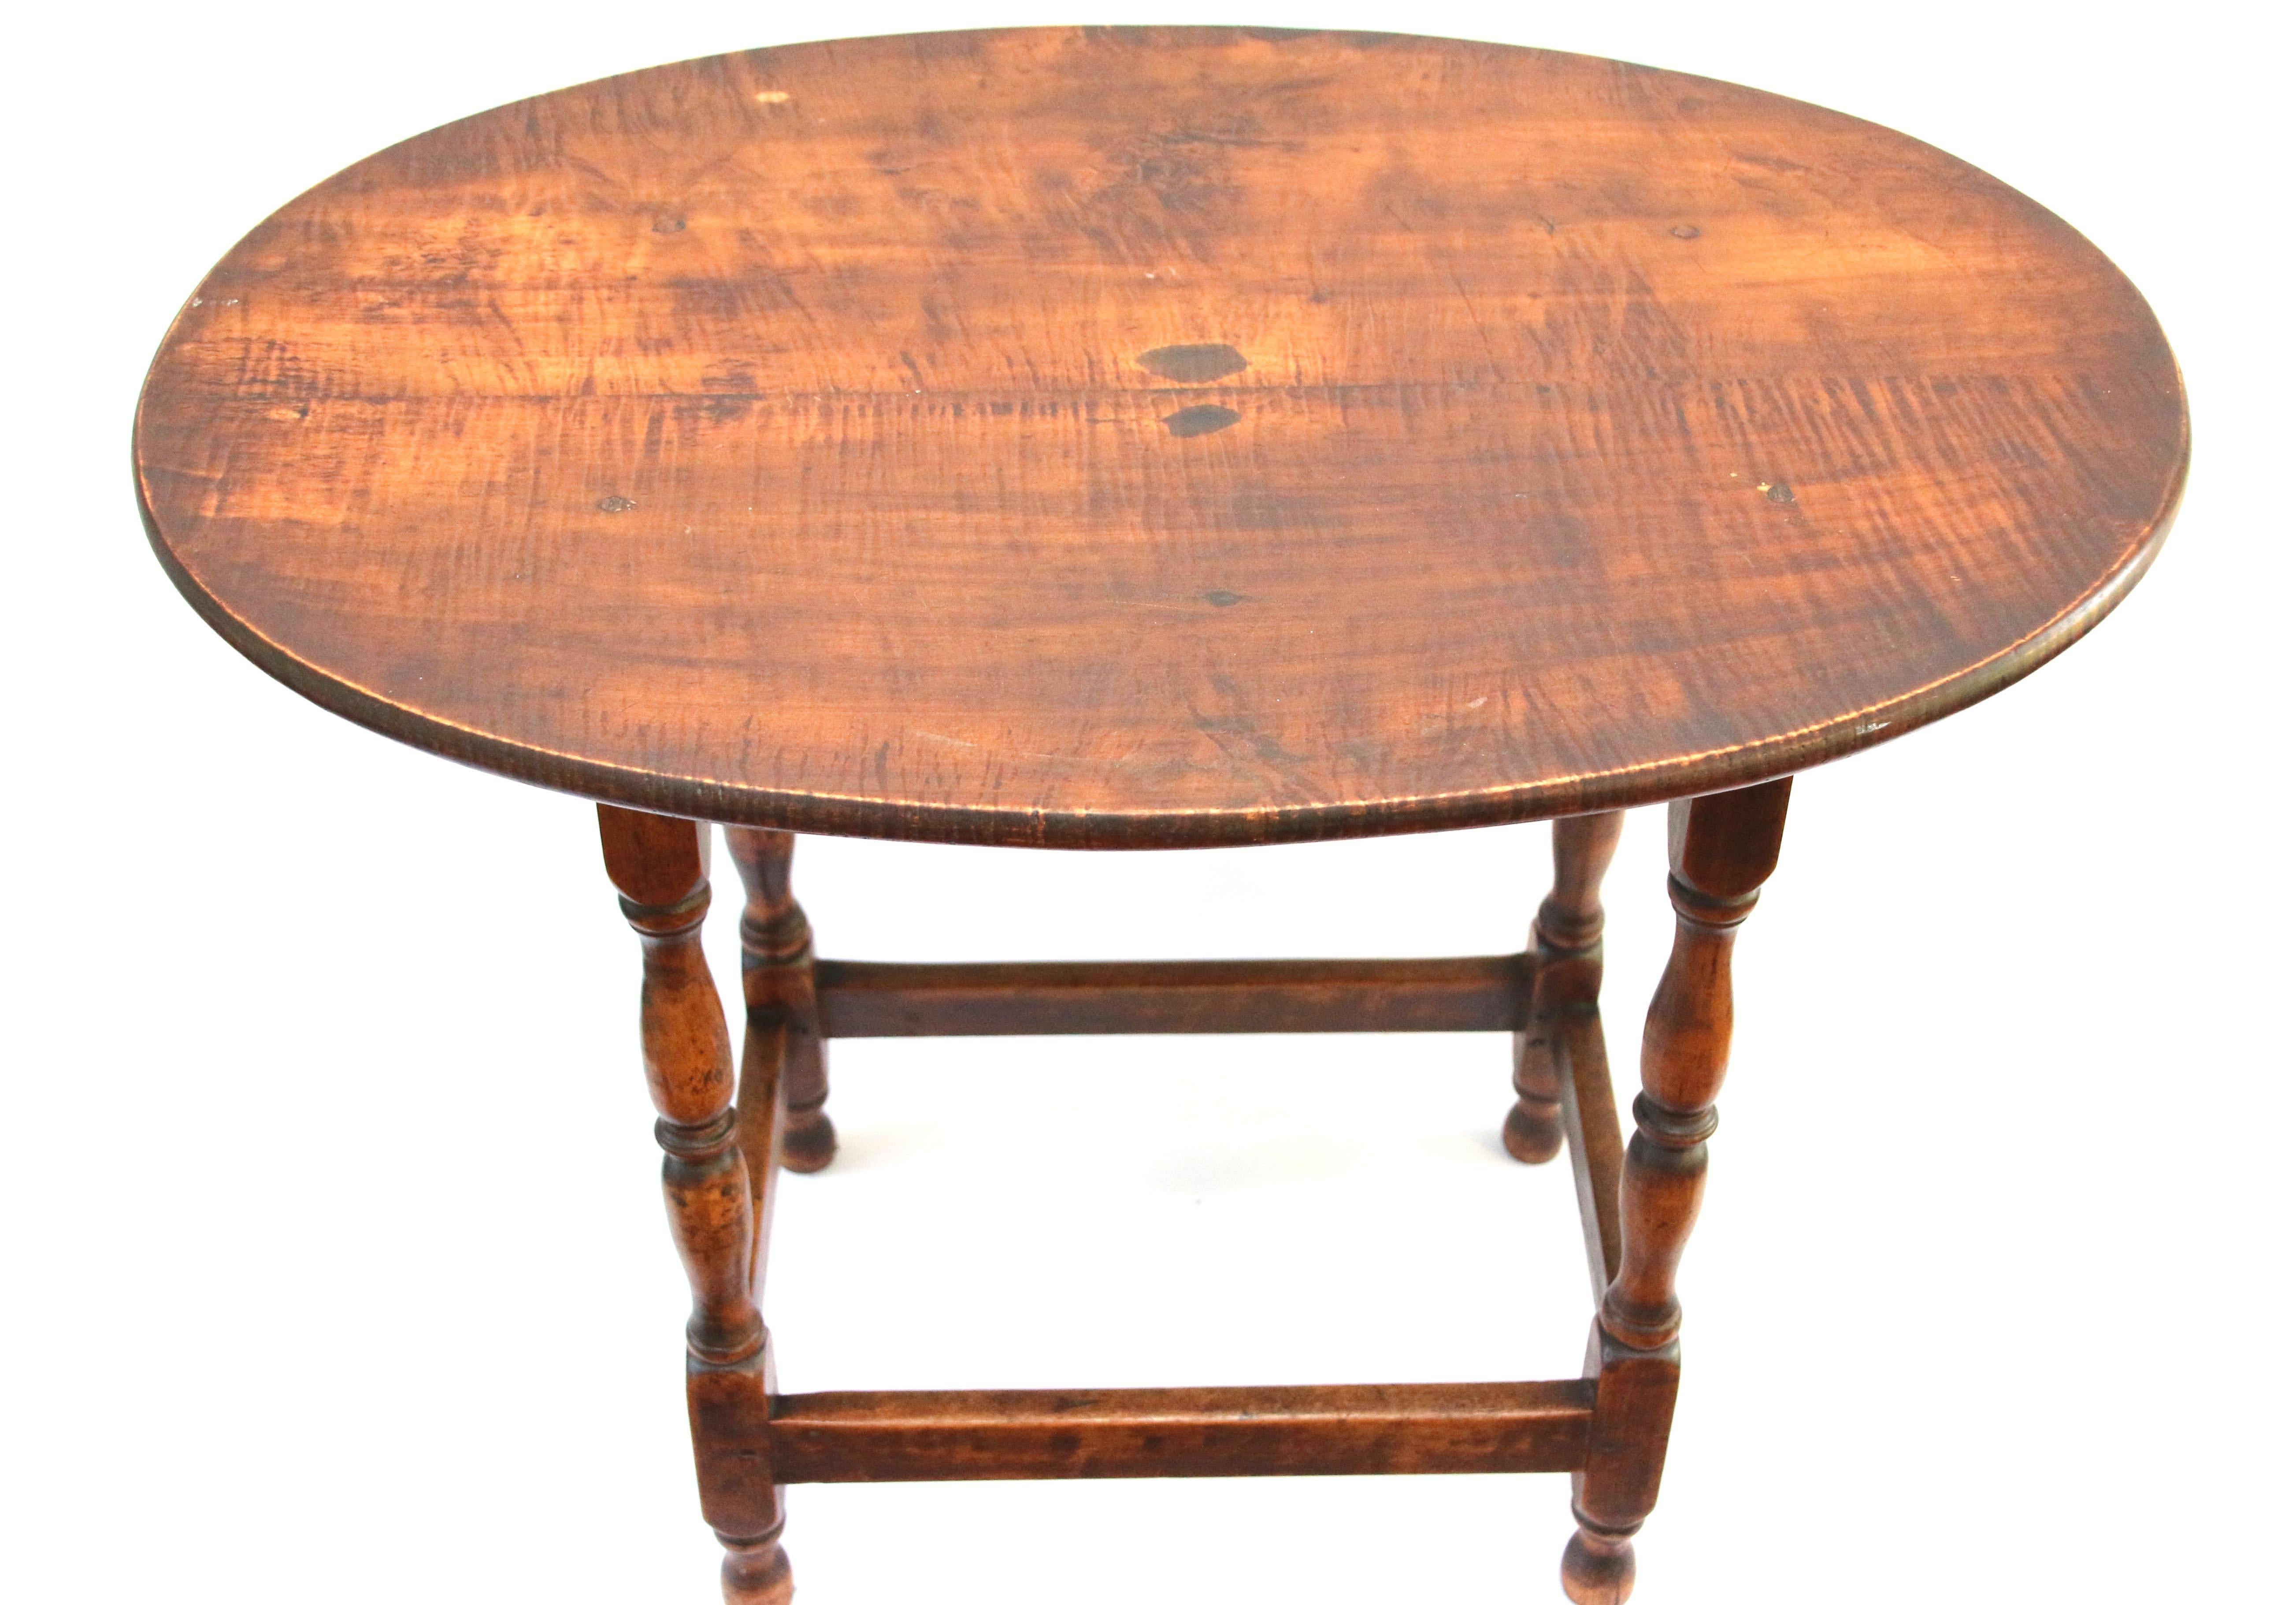 Mid-18th Century New England William and Mary Figured Maple Tavern Table For Sale